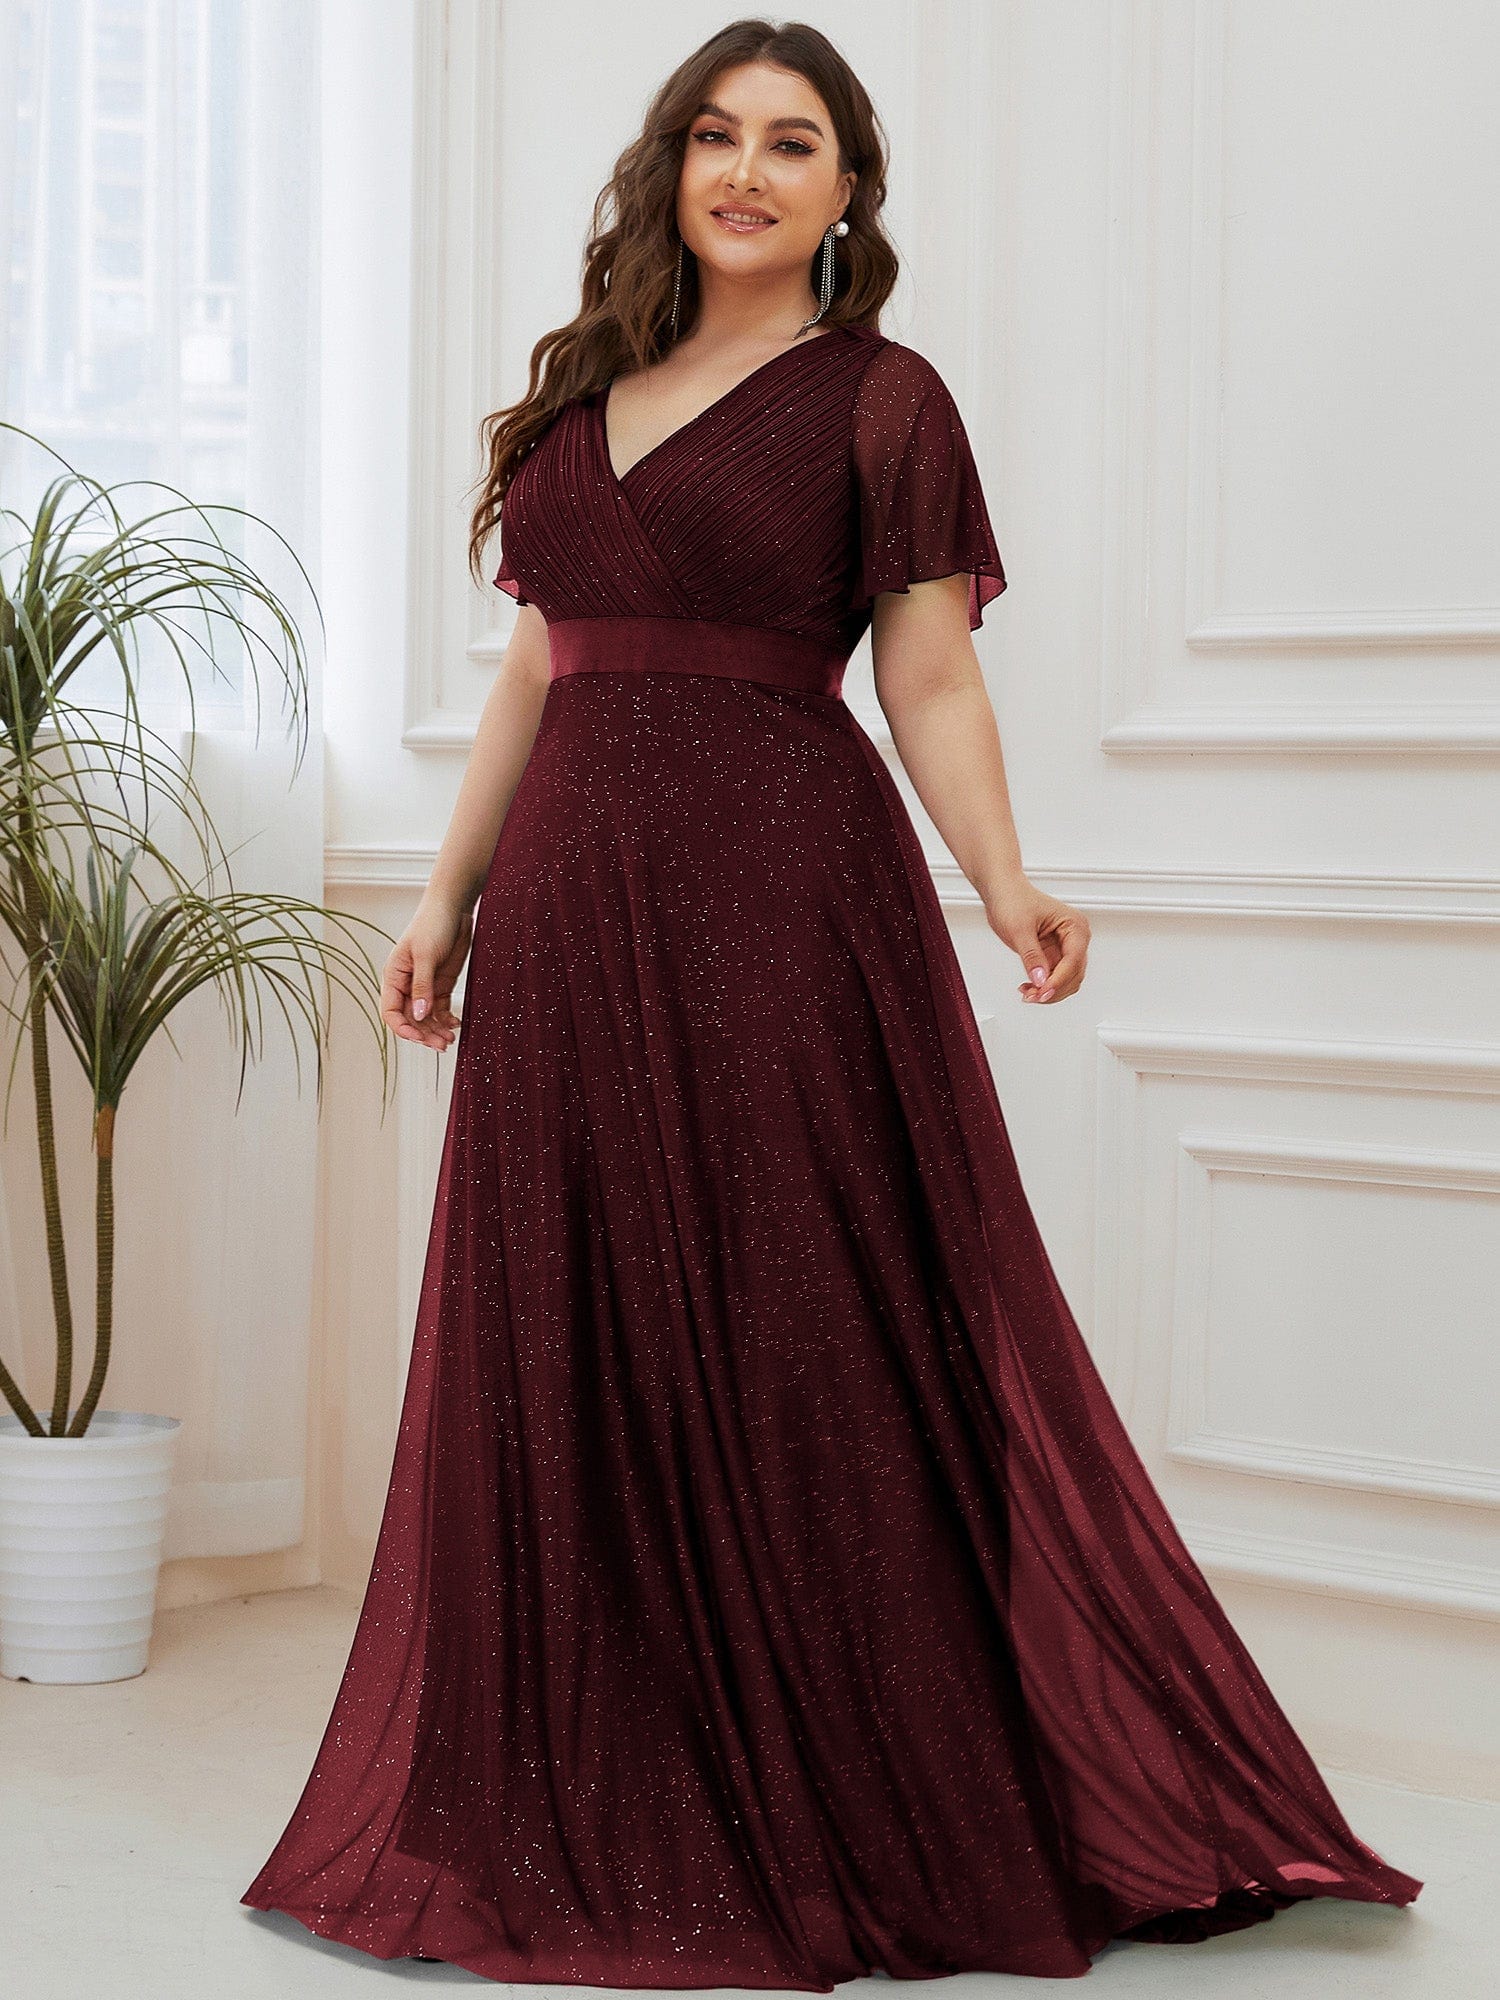  Women's Dresses Elegant V Neck Puff Sleeve Lace Overlay Dress  Dress for Women (Color : Burgundy, Size : Small): Clothing, Shoes & Jewelry